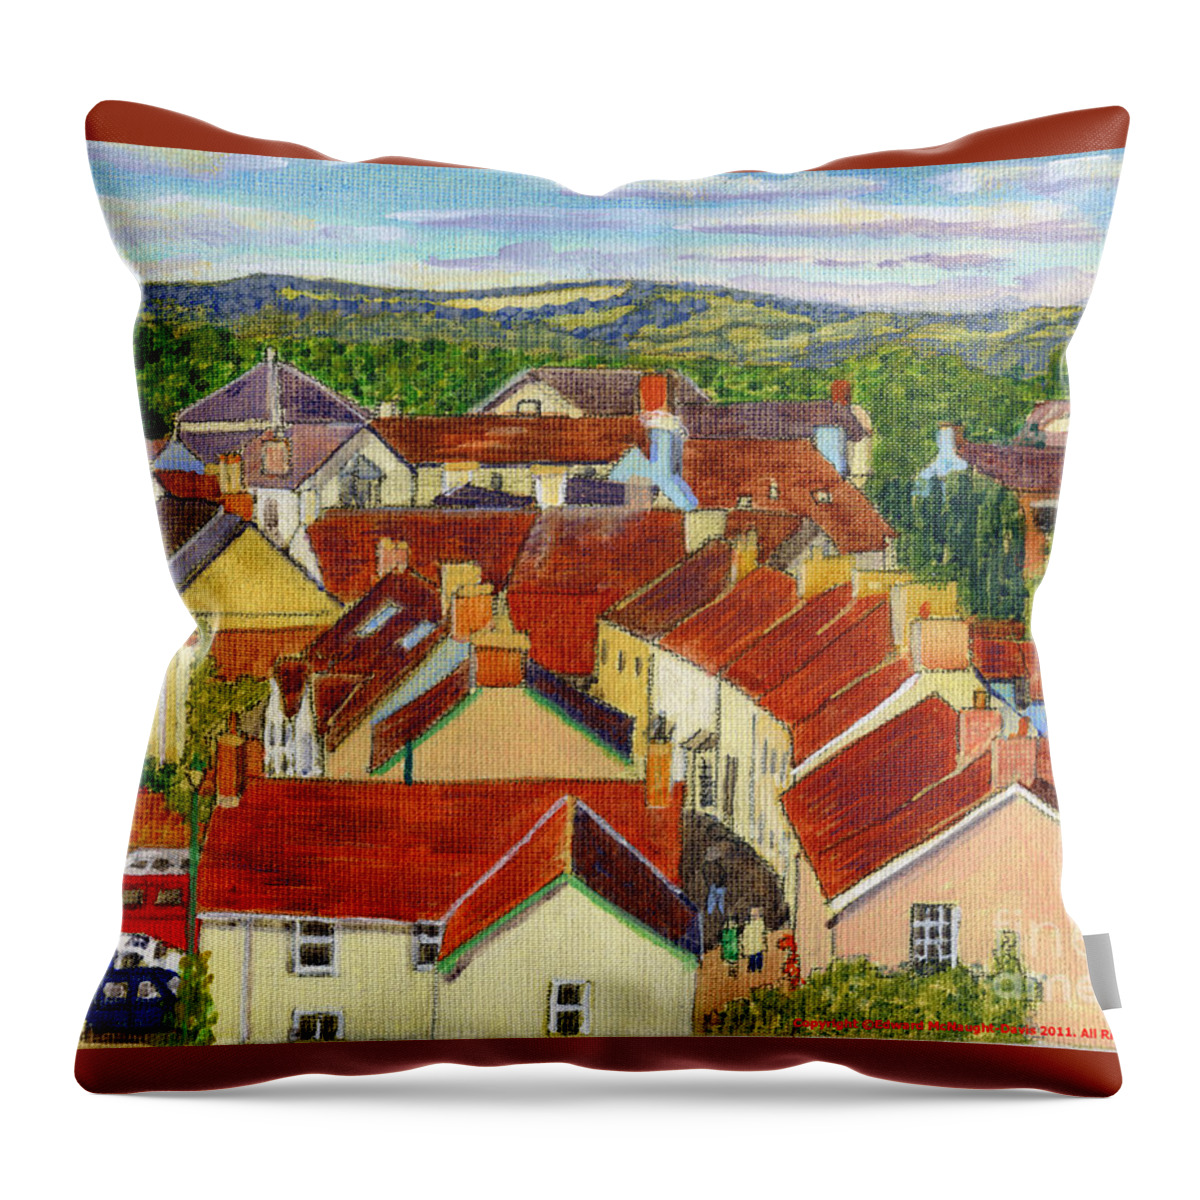 Painting Llandovery Roof Tops Throw Pillow featuring the painting Painting Llandovery Roof Tops by Edward McNaught-Davis